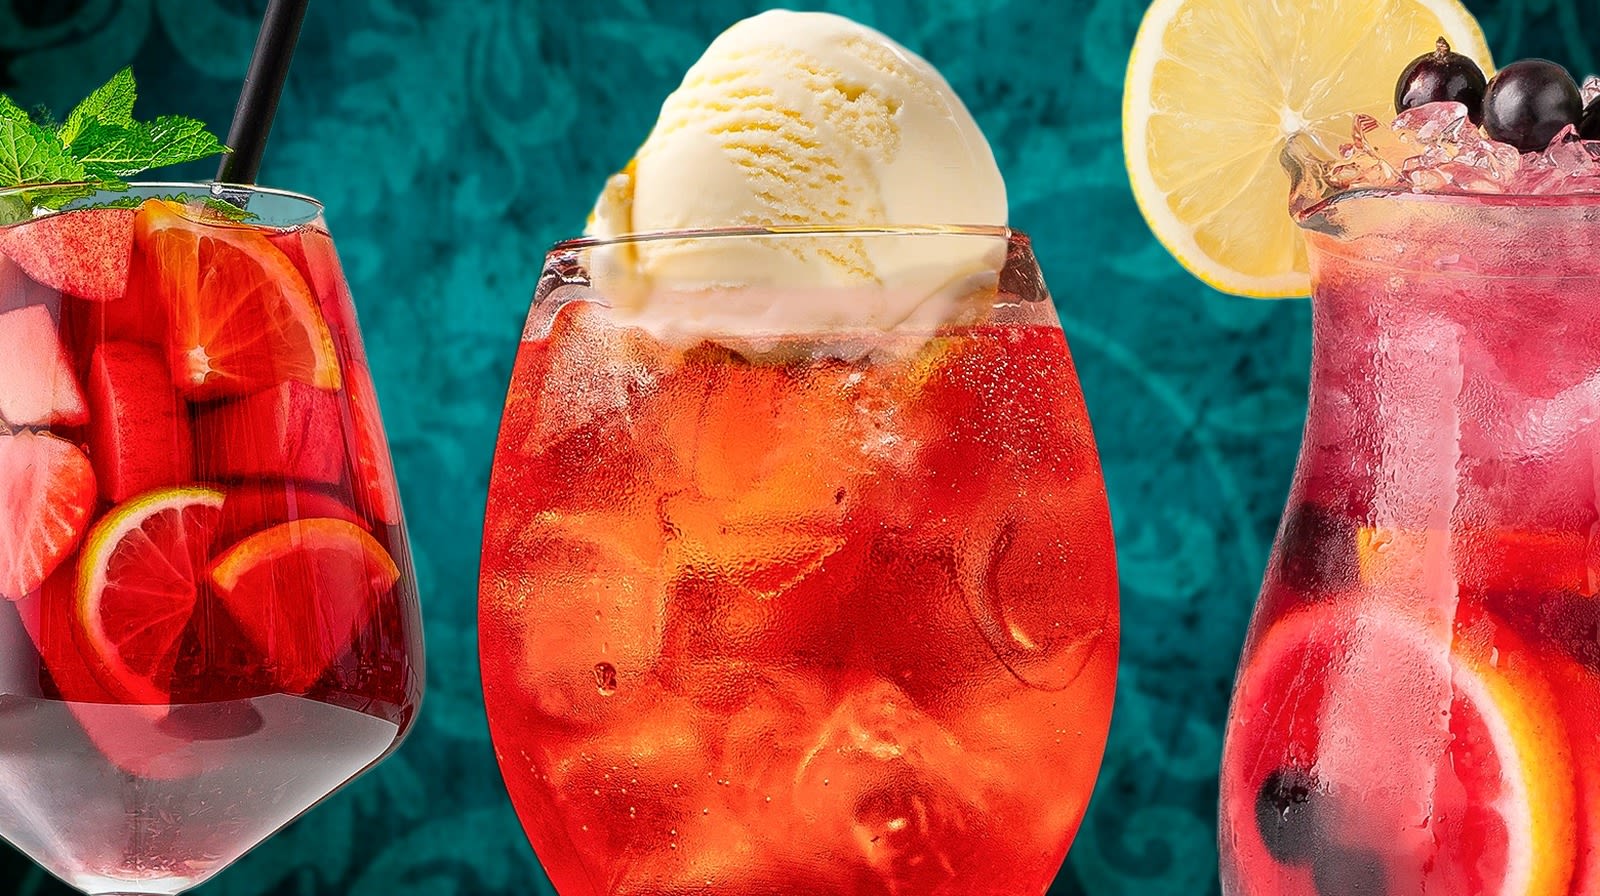 Top Your Glass Of Sangria With A Scoop Of Vanilla Ice Cream For Peak Deliciousness